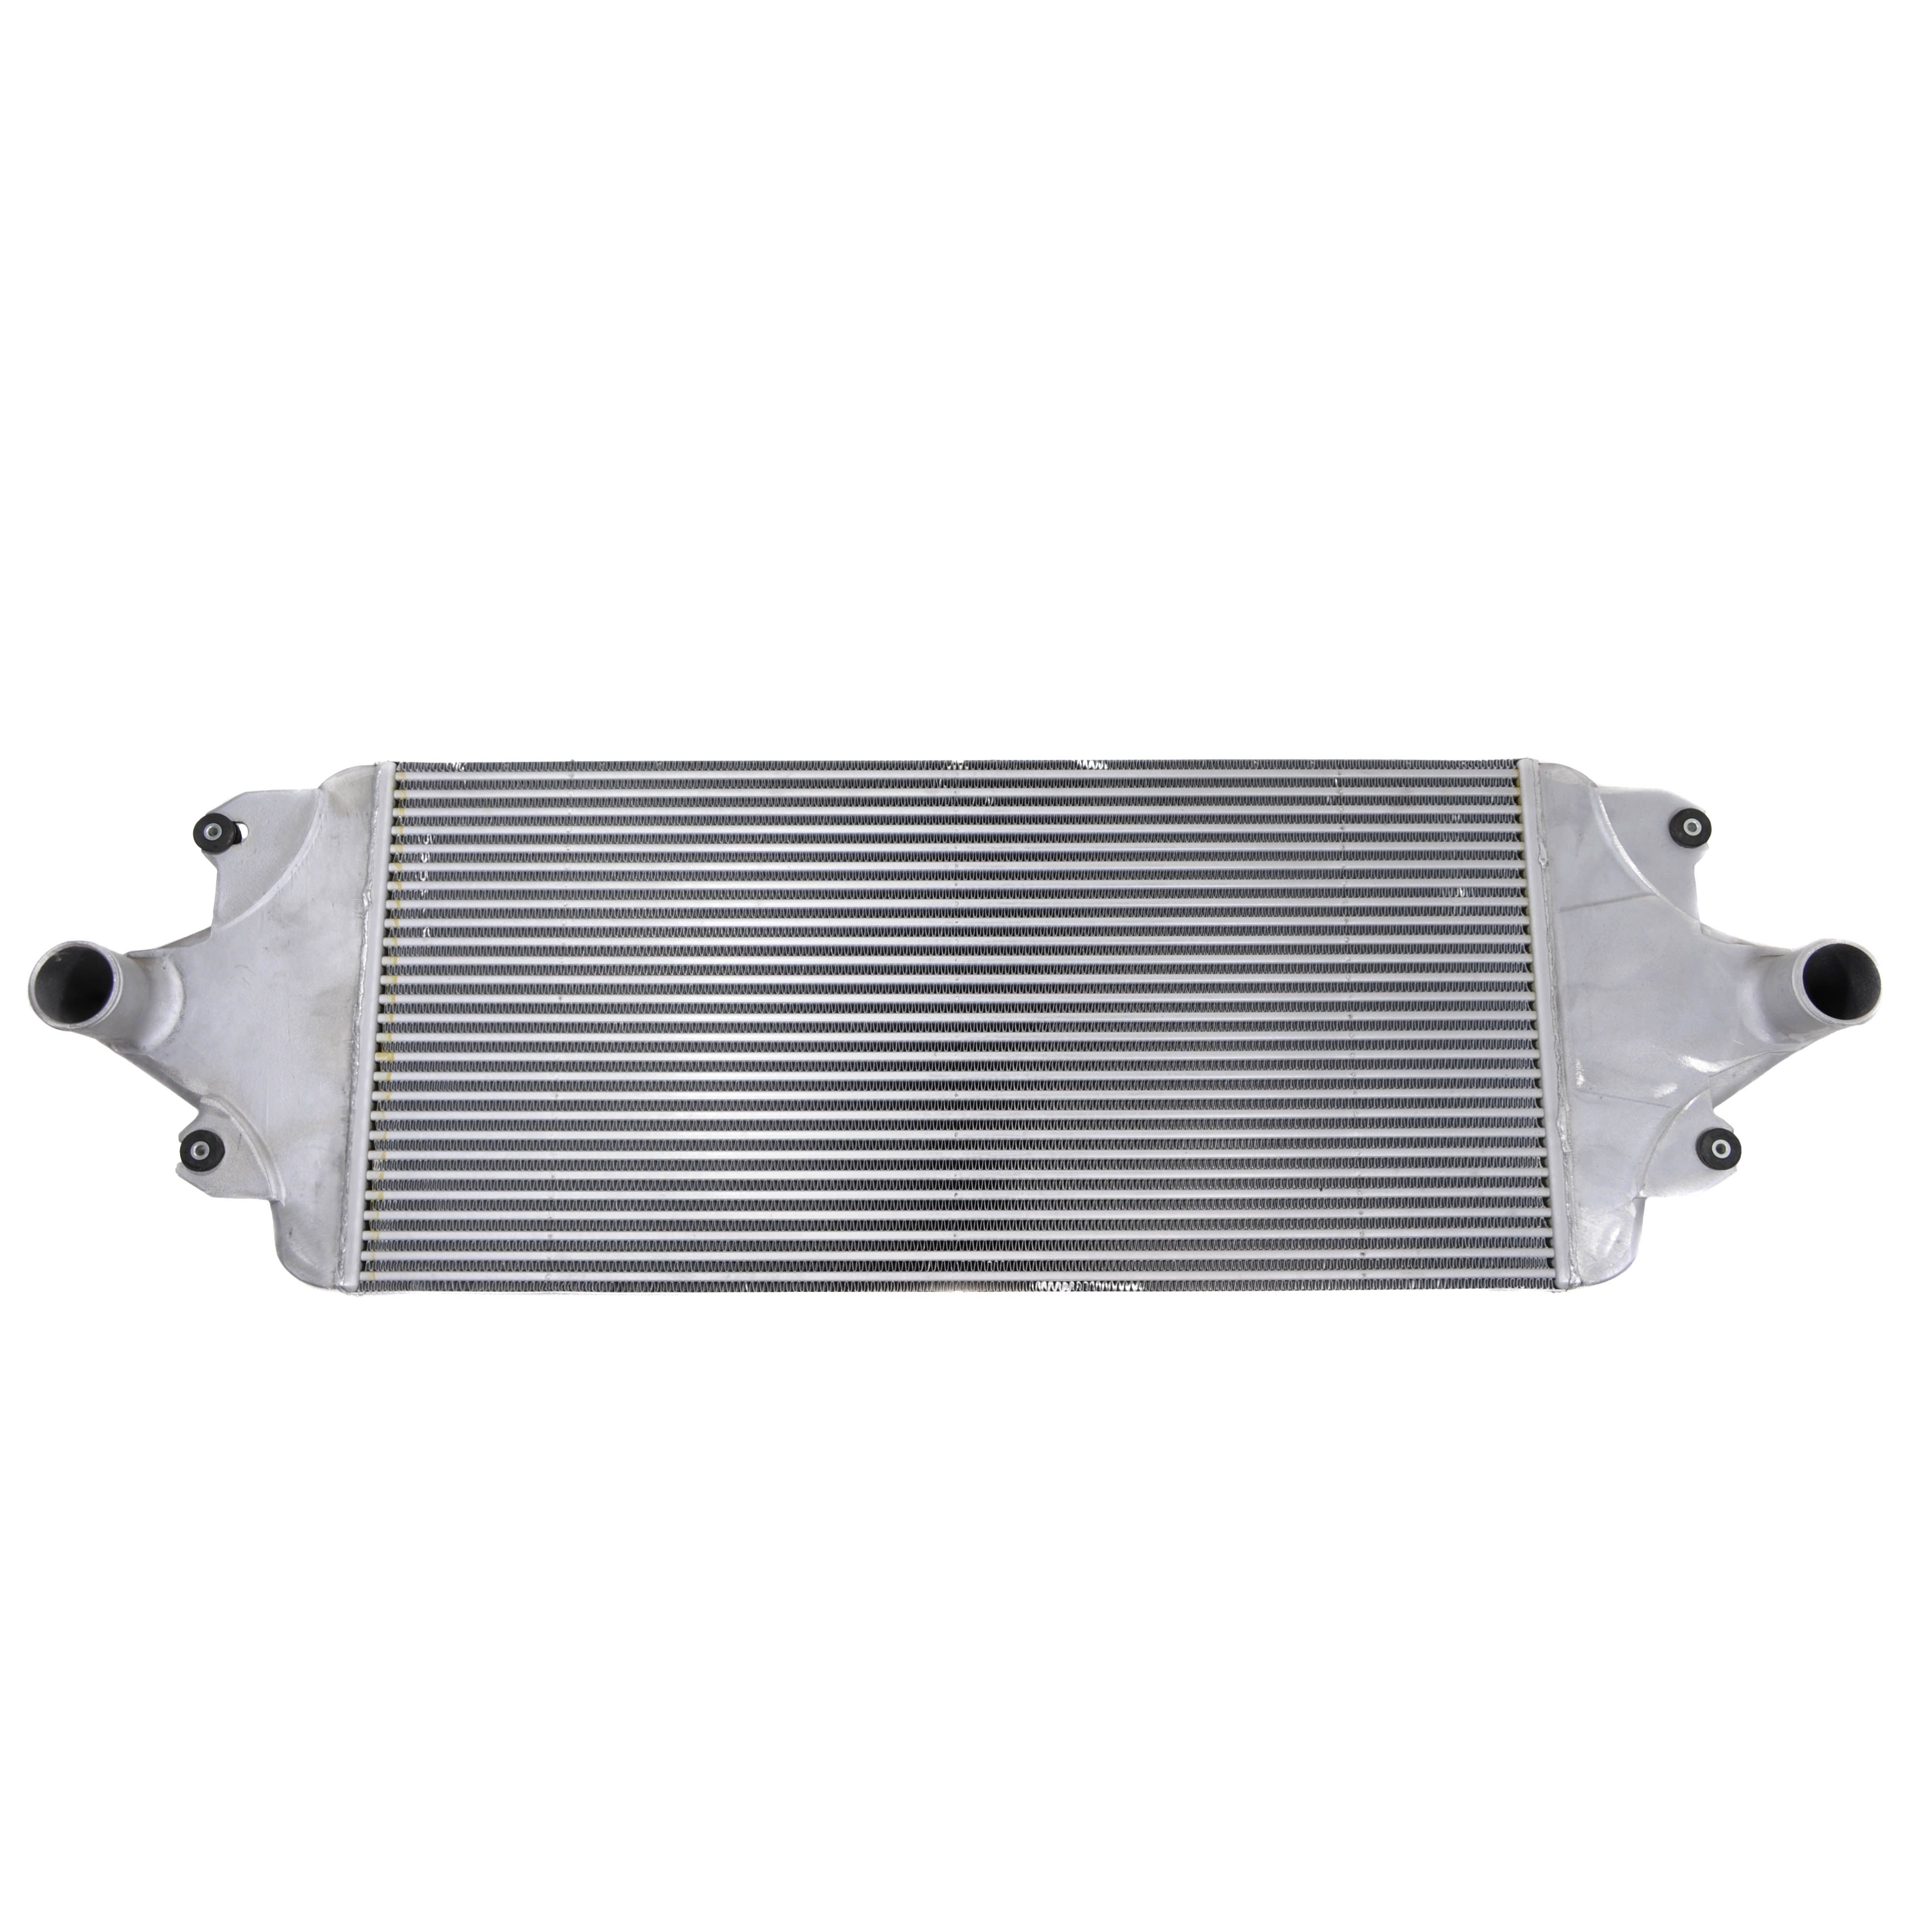 2008 GENUINE CHEVY GMC INTERCOOLER CHARGE AIR COOLER C6500 C7500 C8500